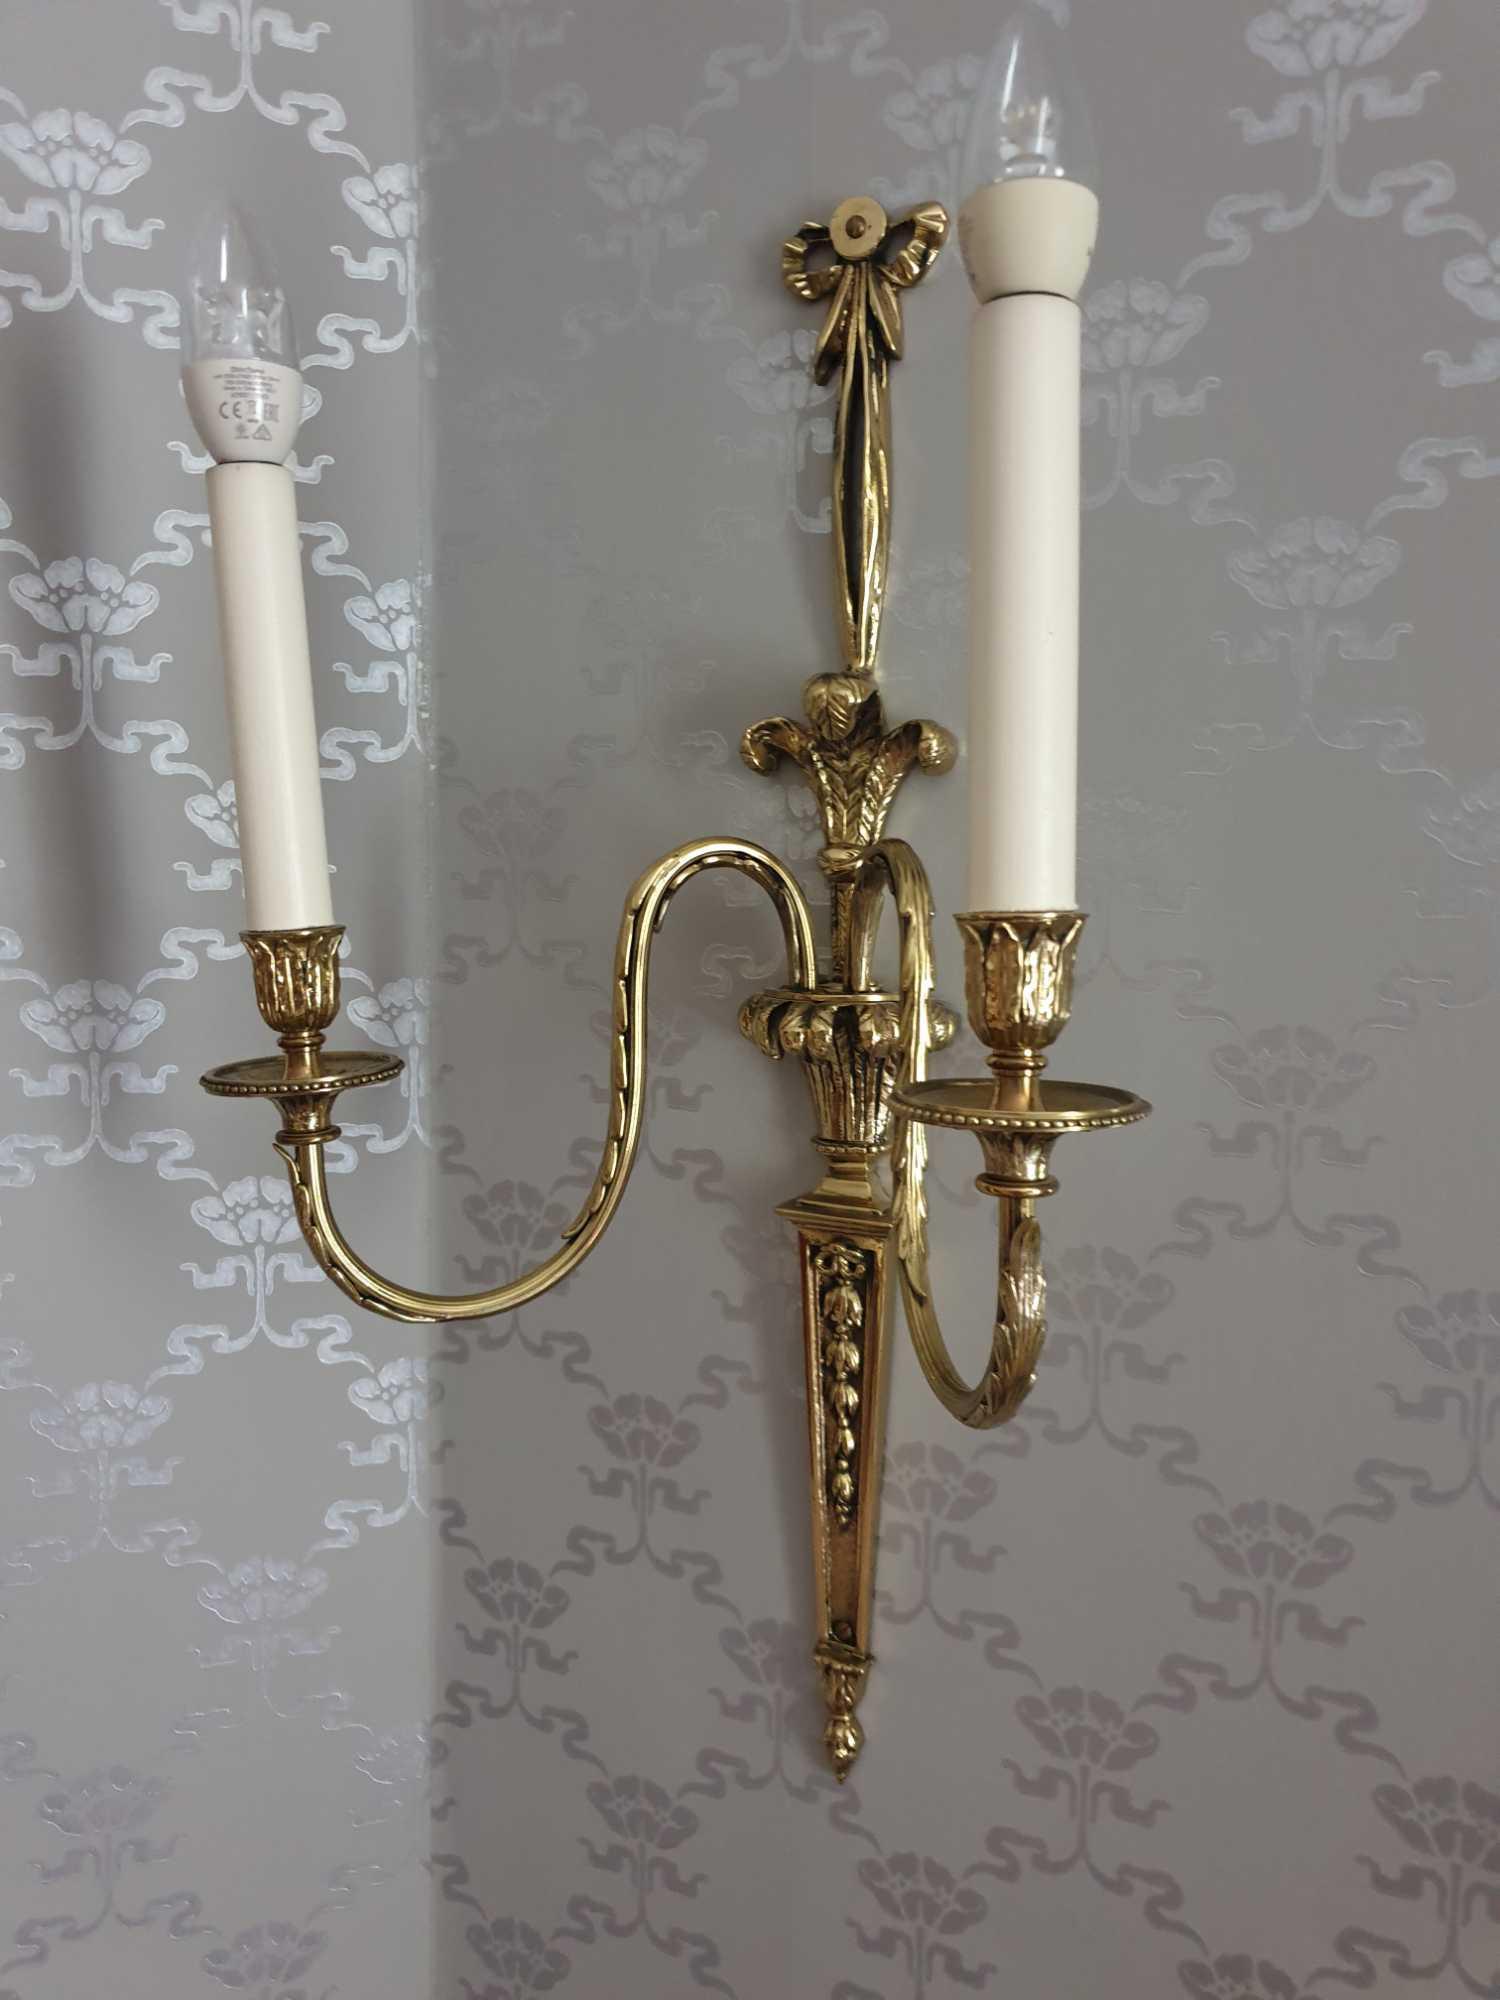 A Pair Of A Pair Of Wall Appliques Twin Leaf Capped Scroll Arms Issuing From A Well-Cast Single